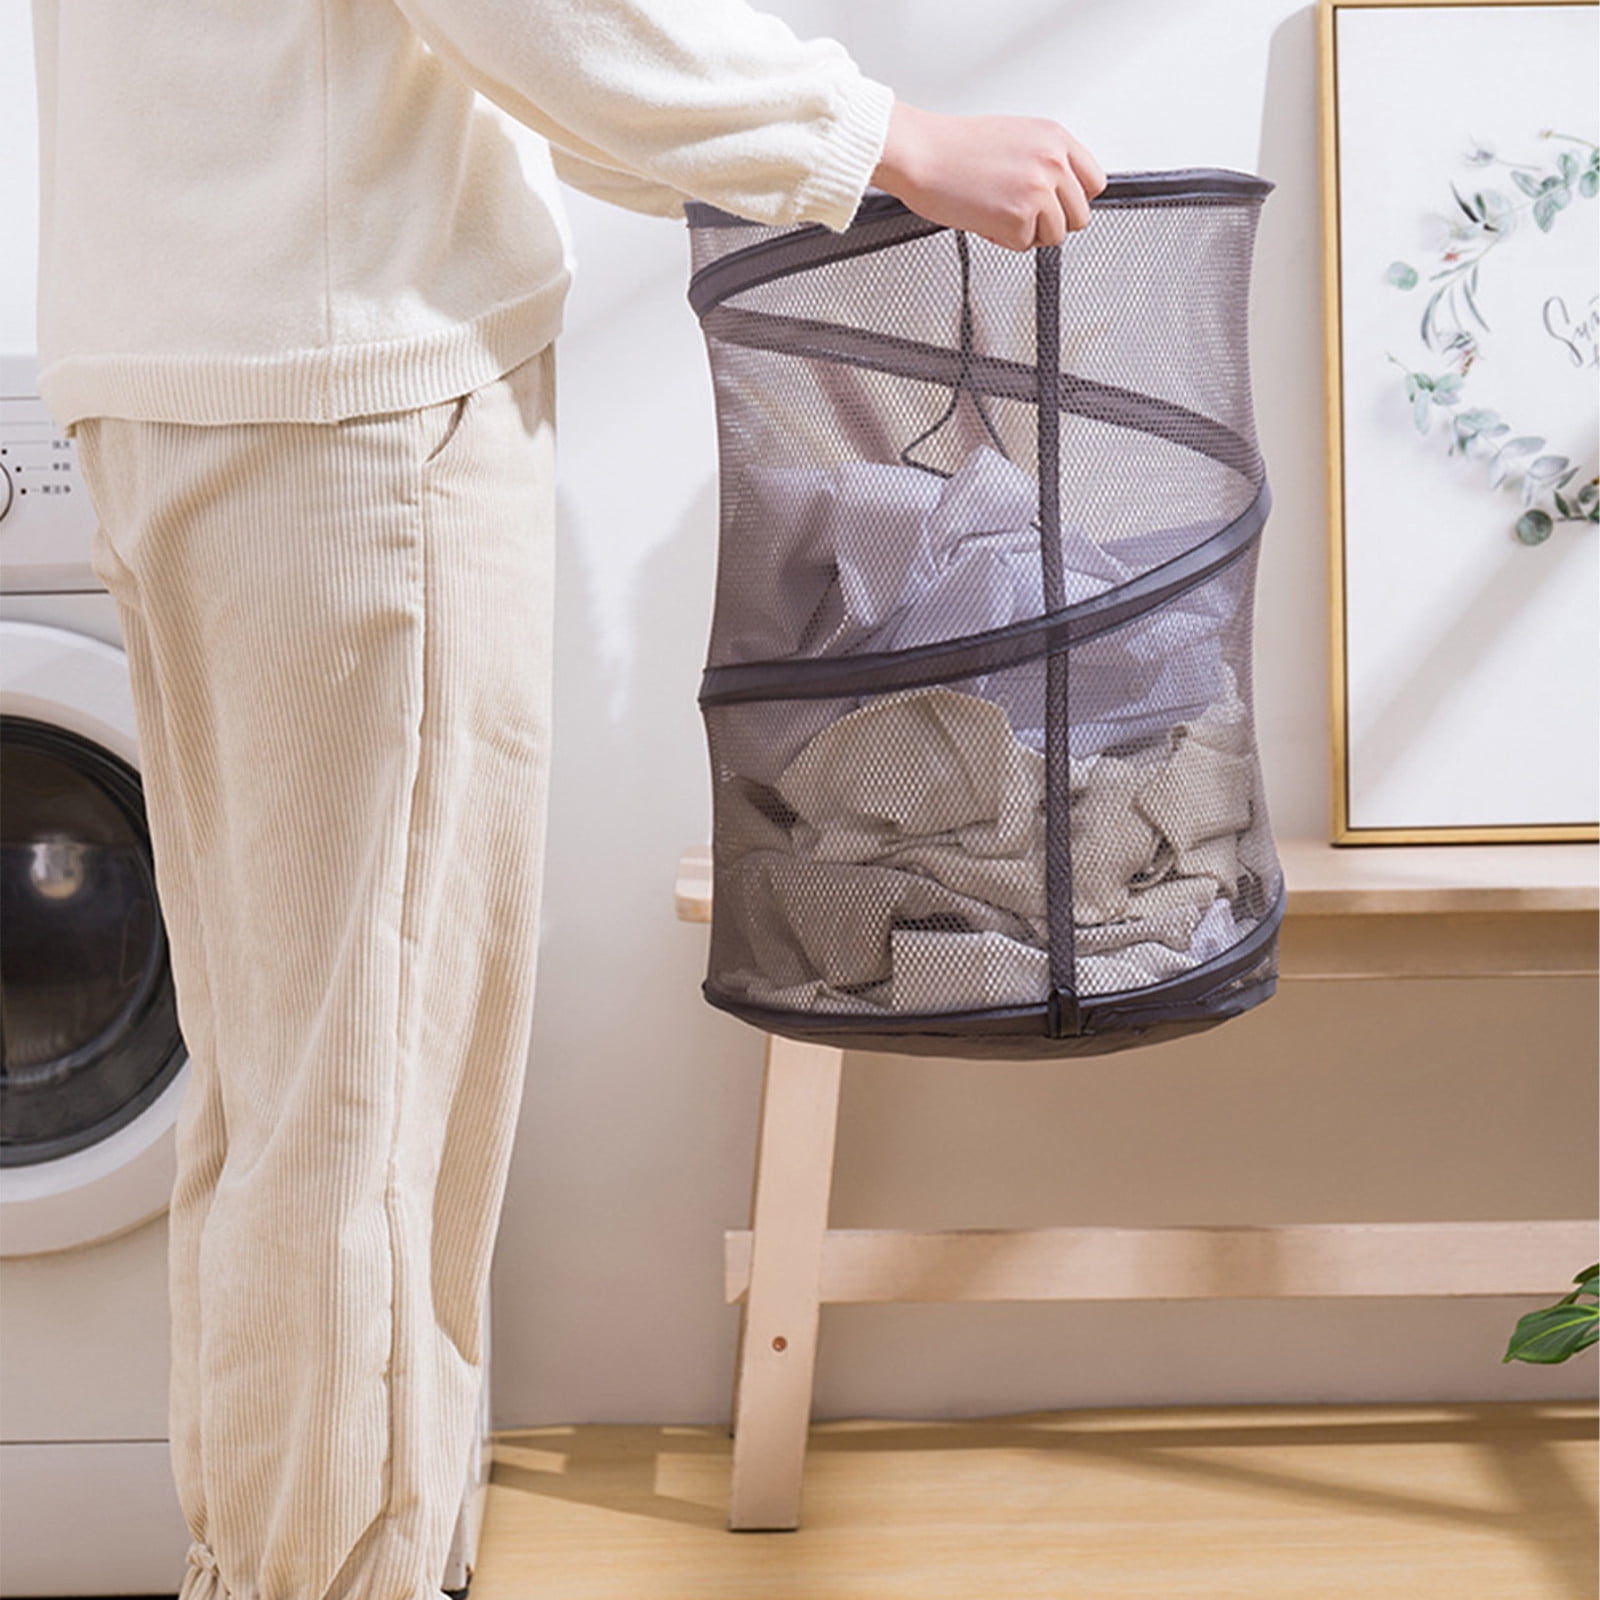 CleverMade Quick Zip Laundry Hamper, 2-pack